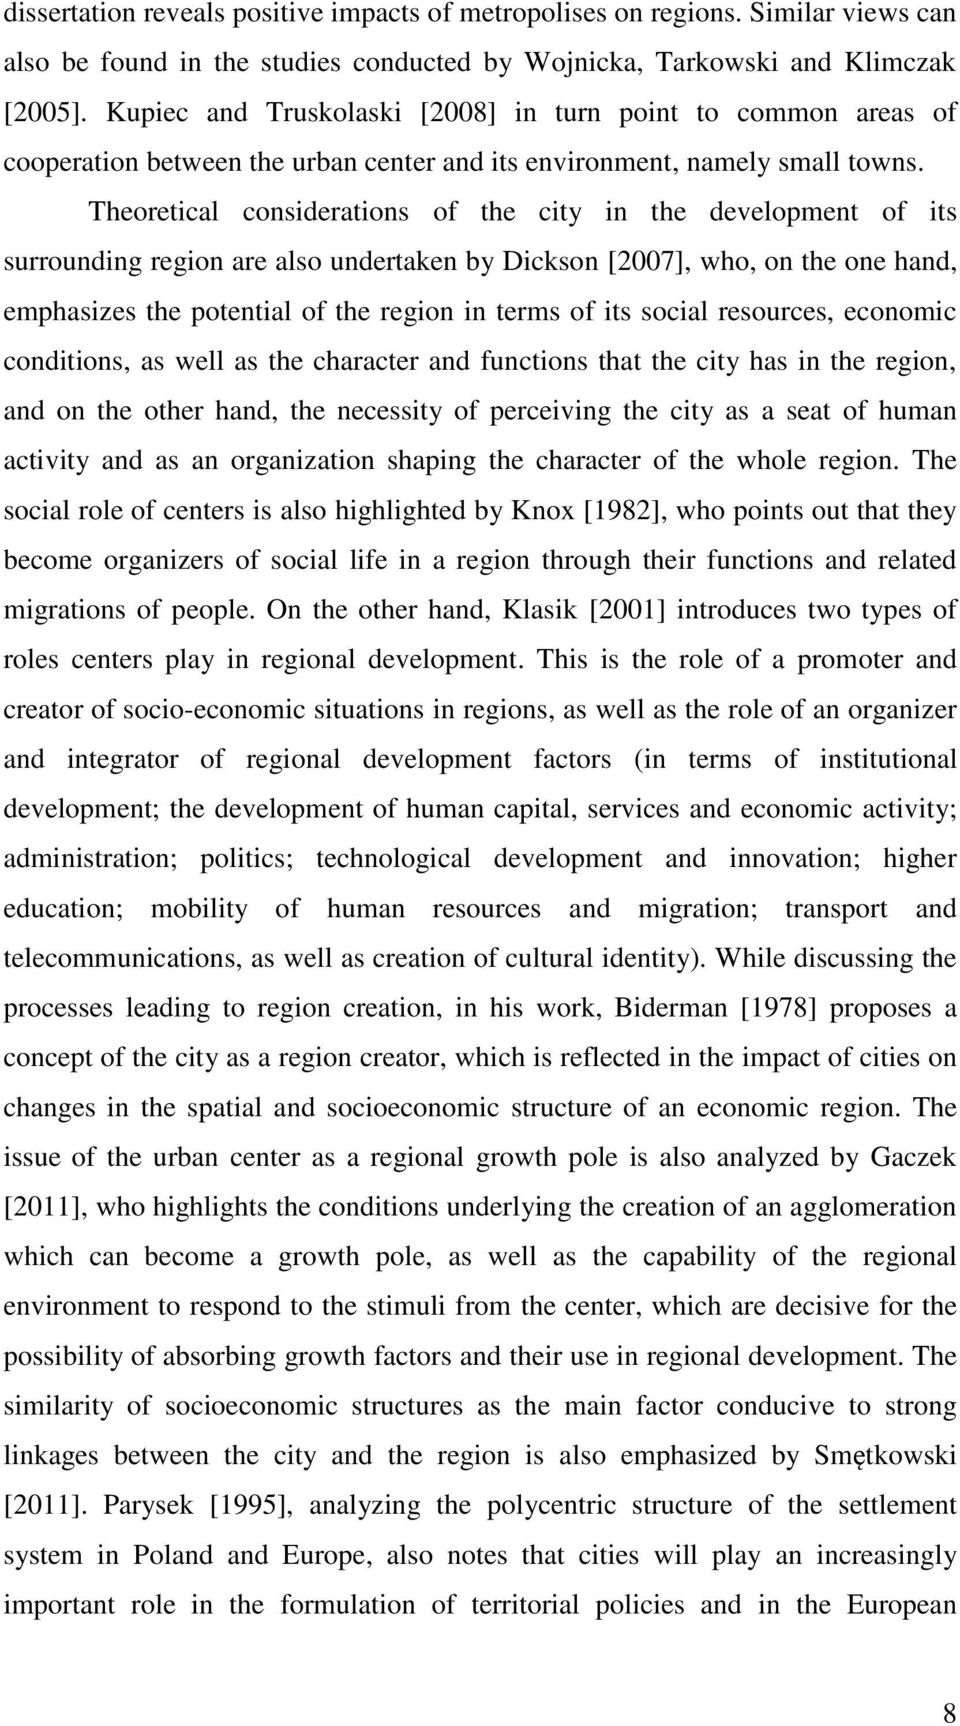 Theoretical considerations of the city in the development of its surrounding region are also undertaken by Dickson [2007], who, on the one hand, emphasizes the potential of the region in terms of its